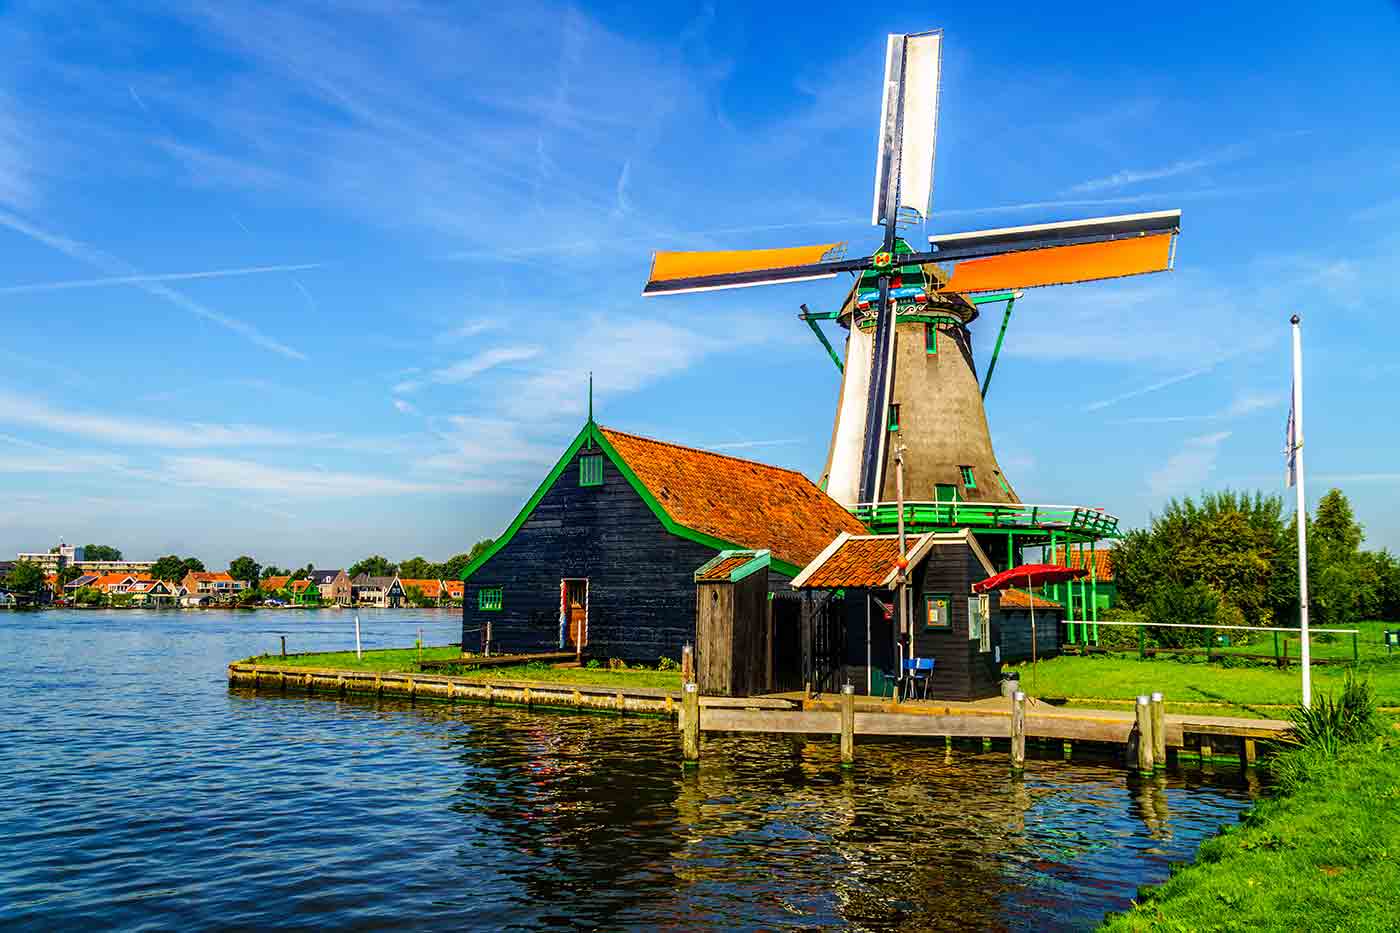 Things to See in Zaanse Schans